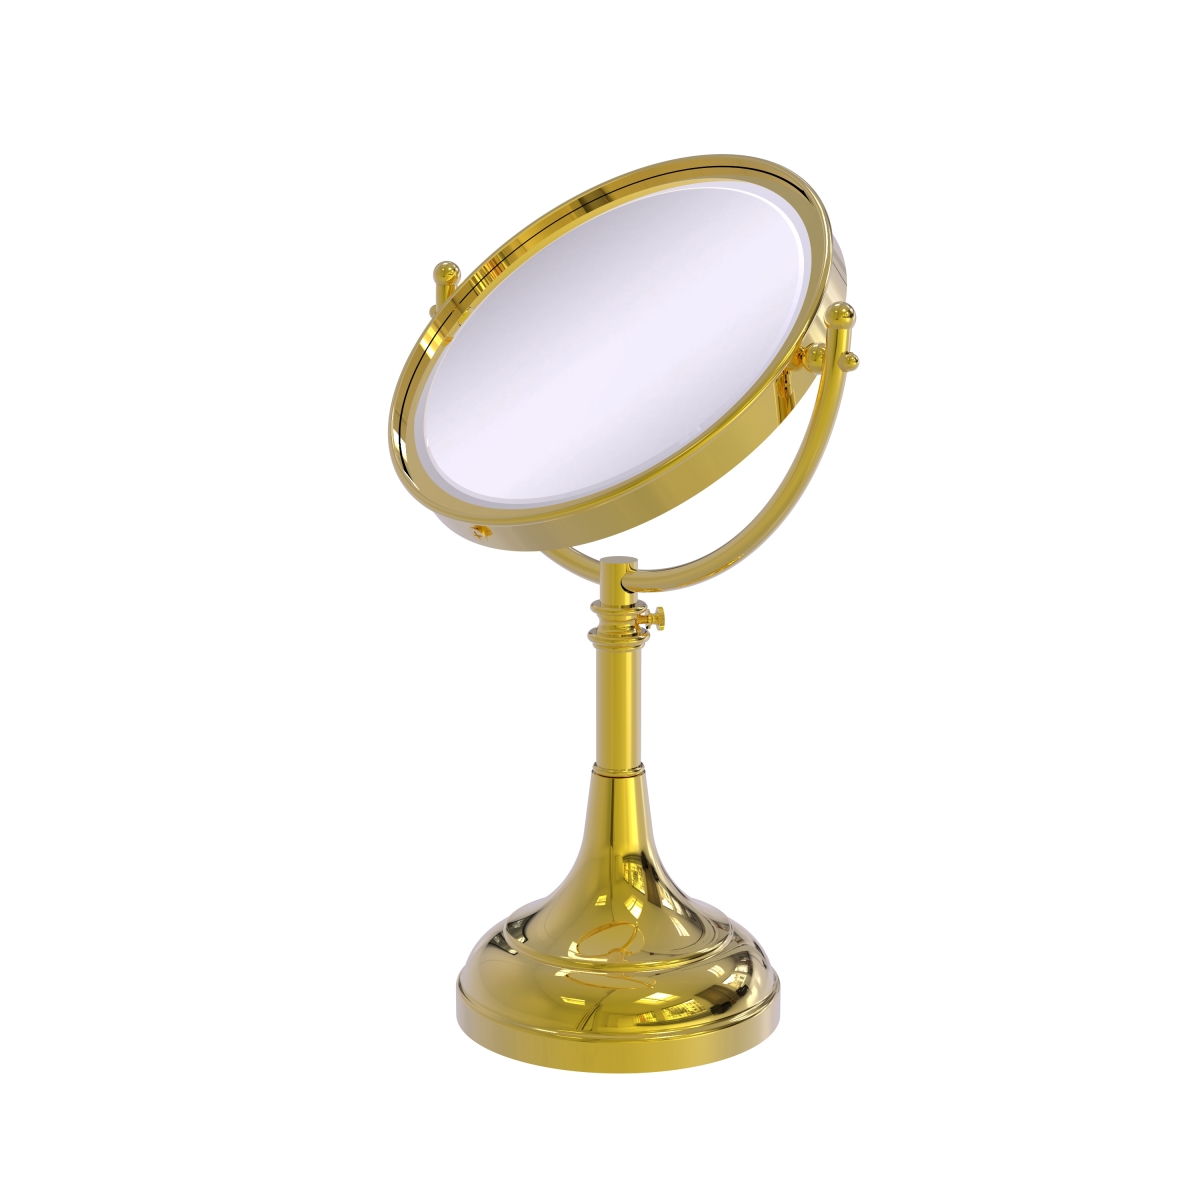 Picture of Allied Brass DM-1-5X-PB 8 in. Height Adjustable Vanity Top Make-Up Mirror 5X Magnification, Polished Brass